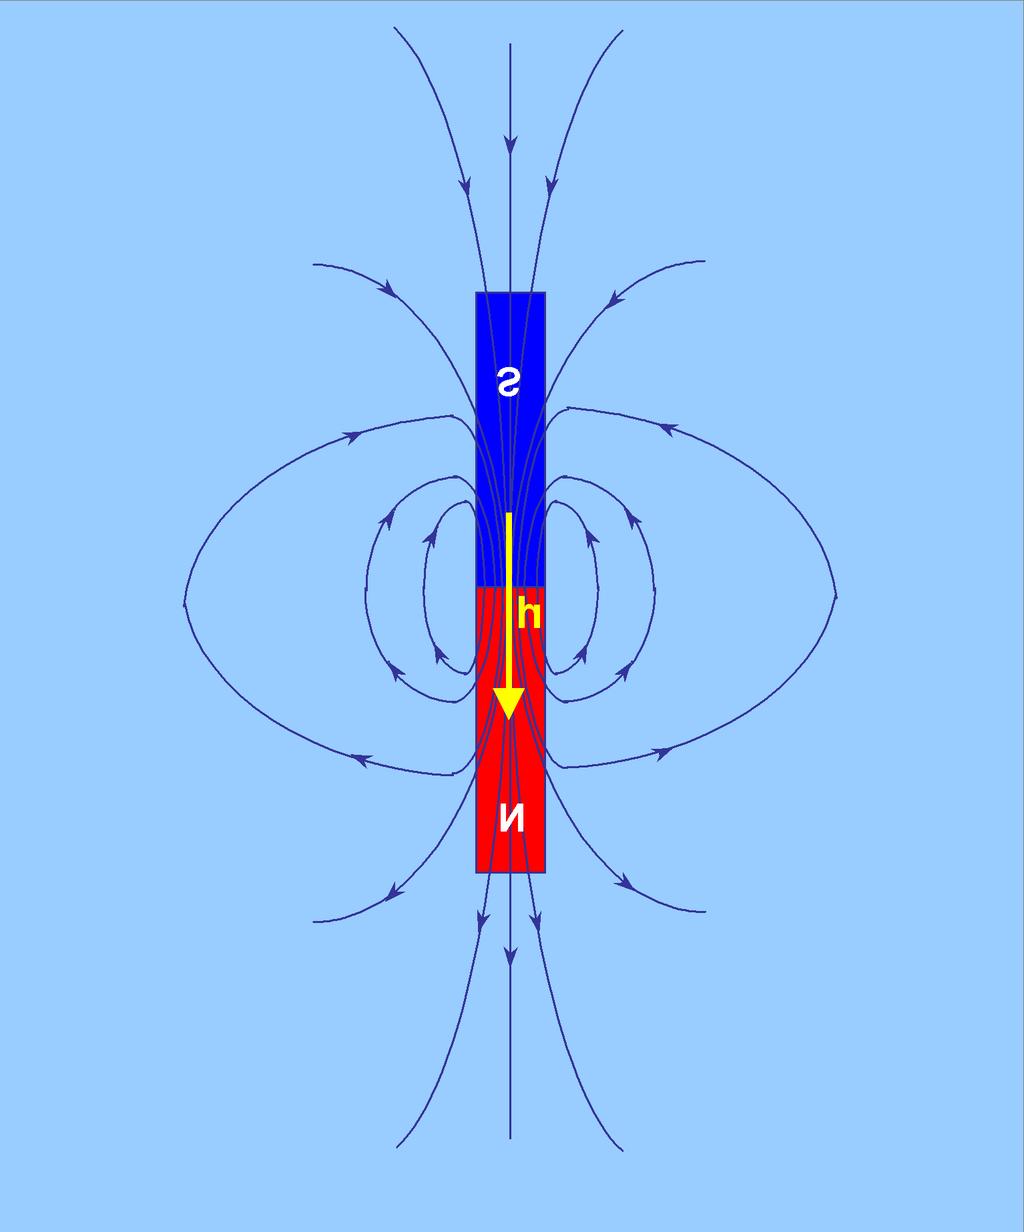 Magnetic field of the bar magnet. Spatial distribution of the magnetic field lines produced by the bar magnet is similar to that one due to the coil with the current - Compare figures 1and 2.